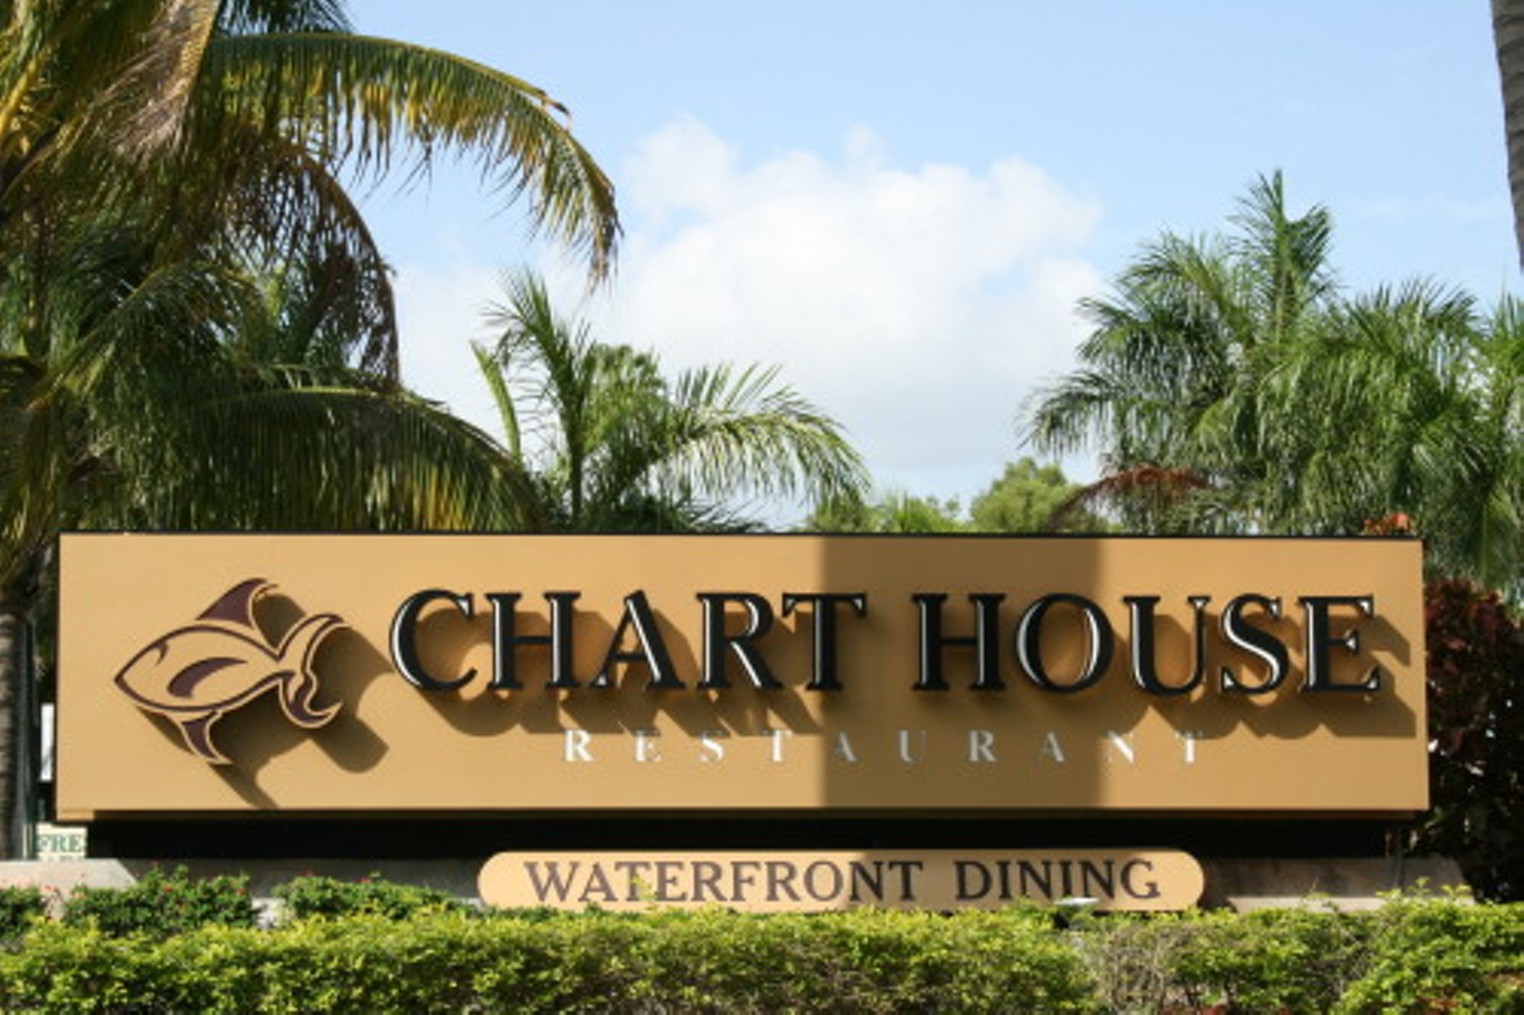 The Chart House